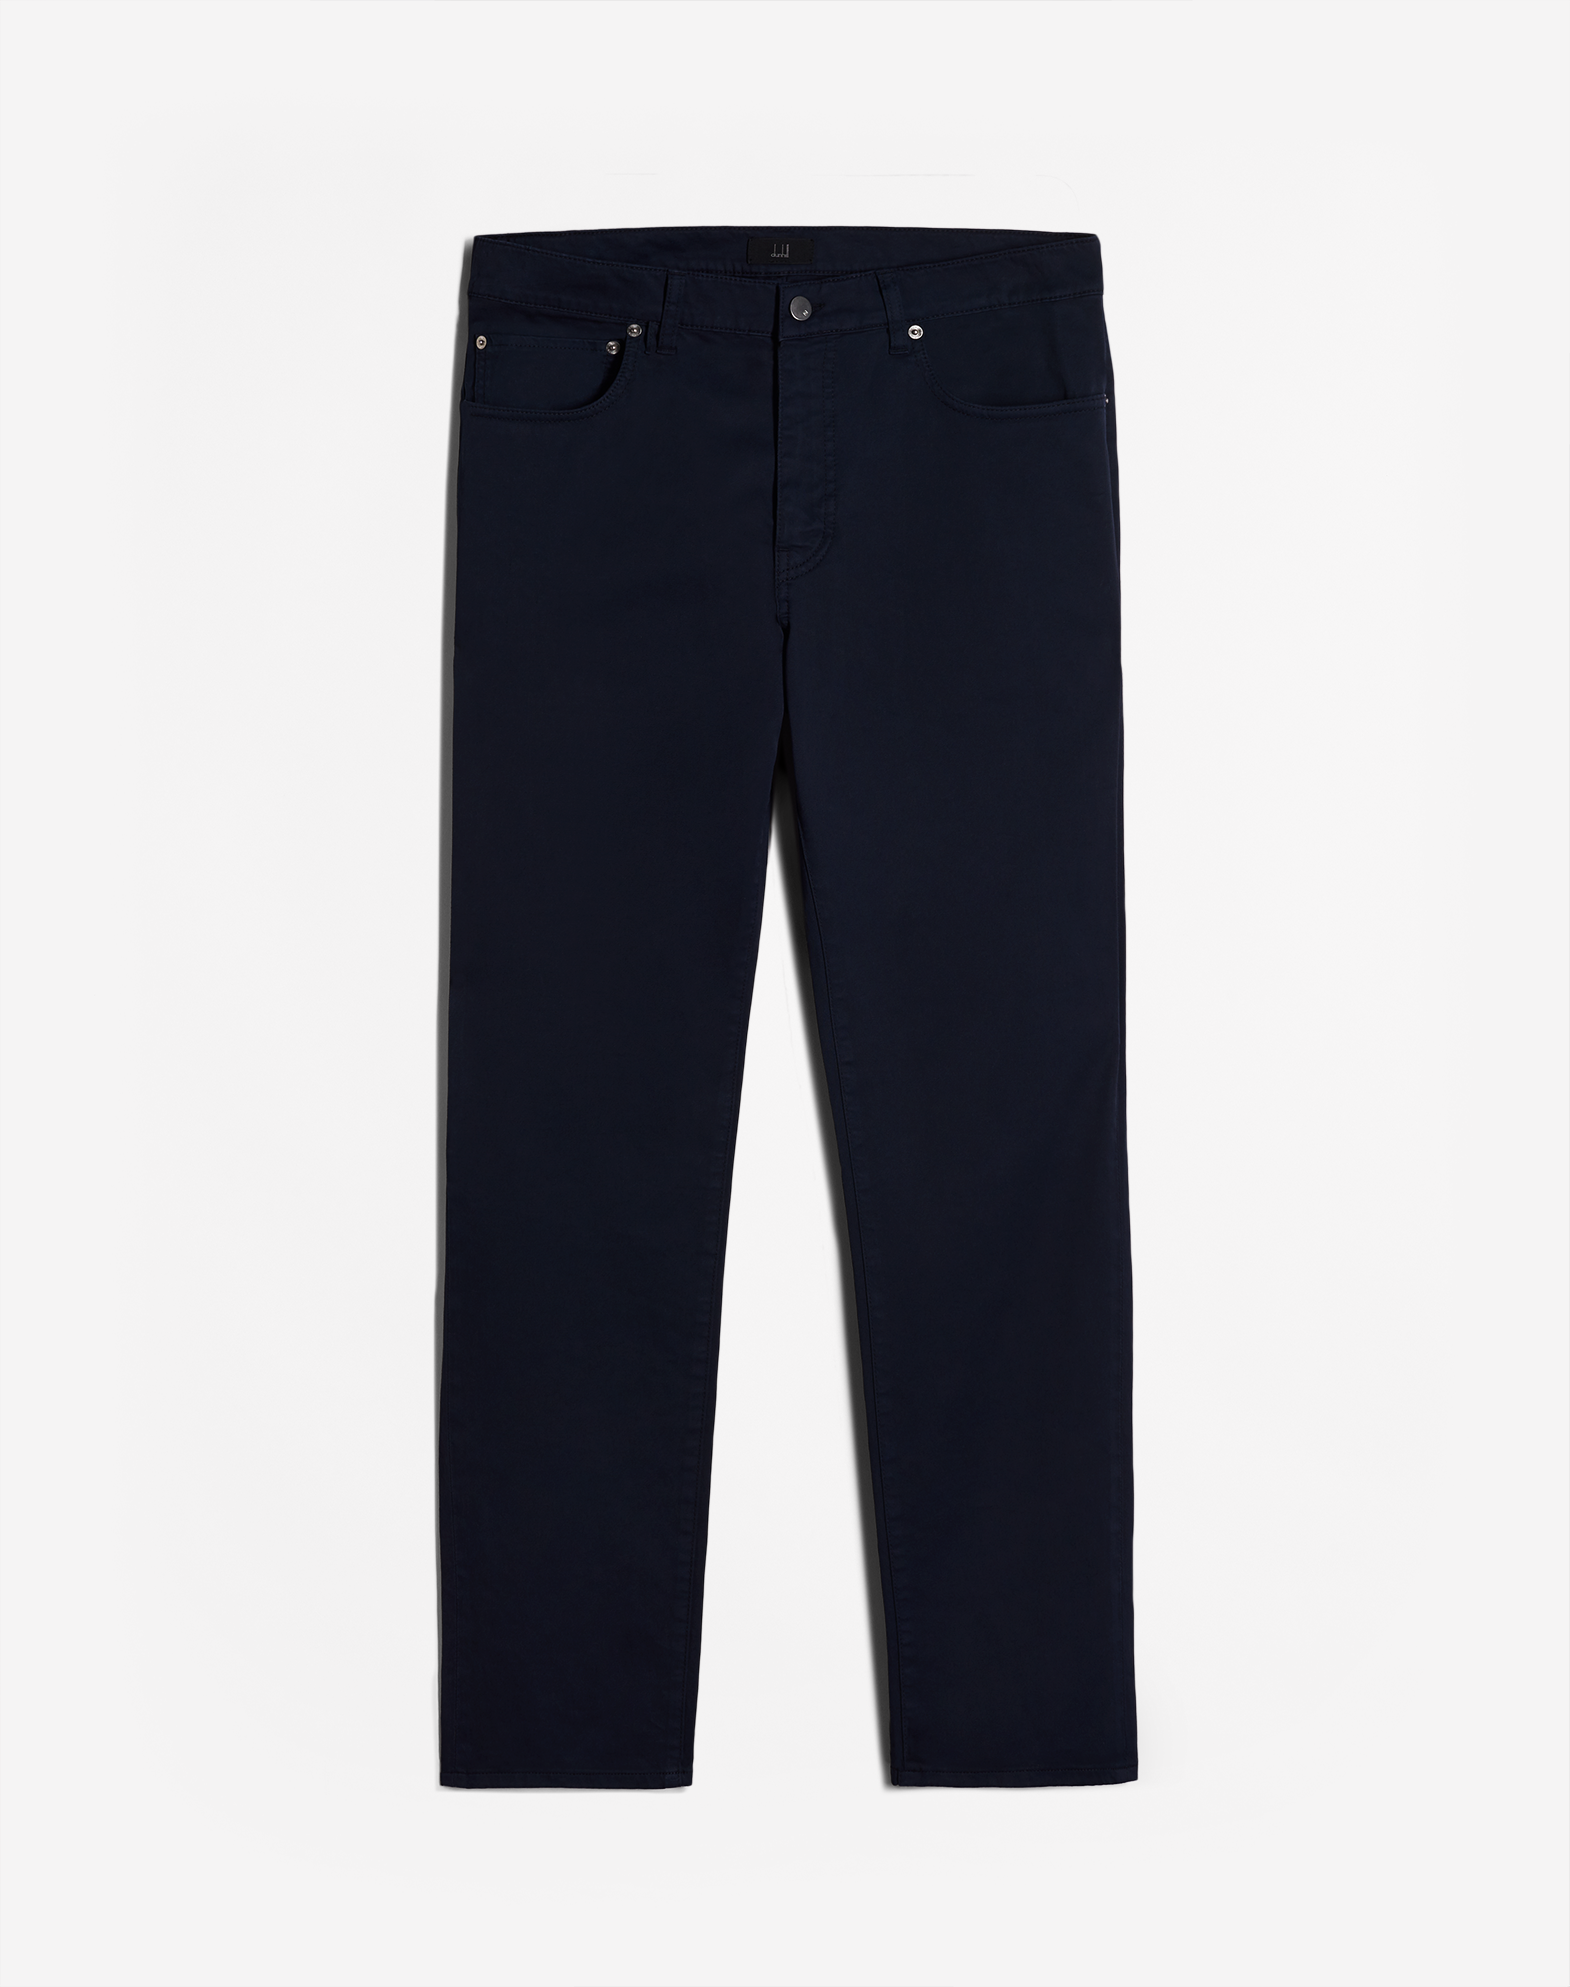 Dunhill Cotton Twill 5 Pocket Trousers In Black